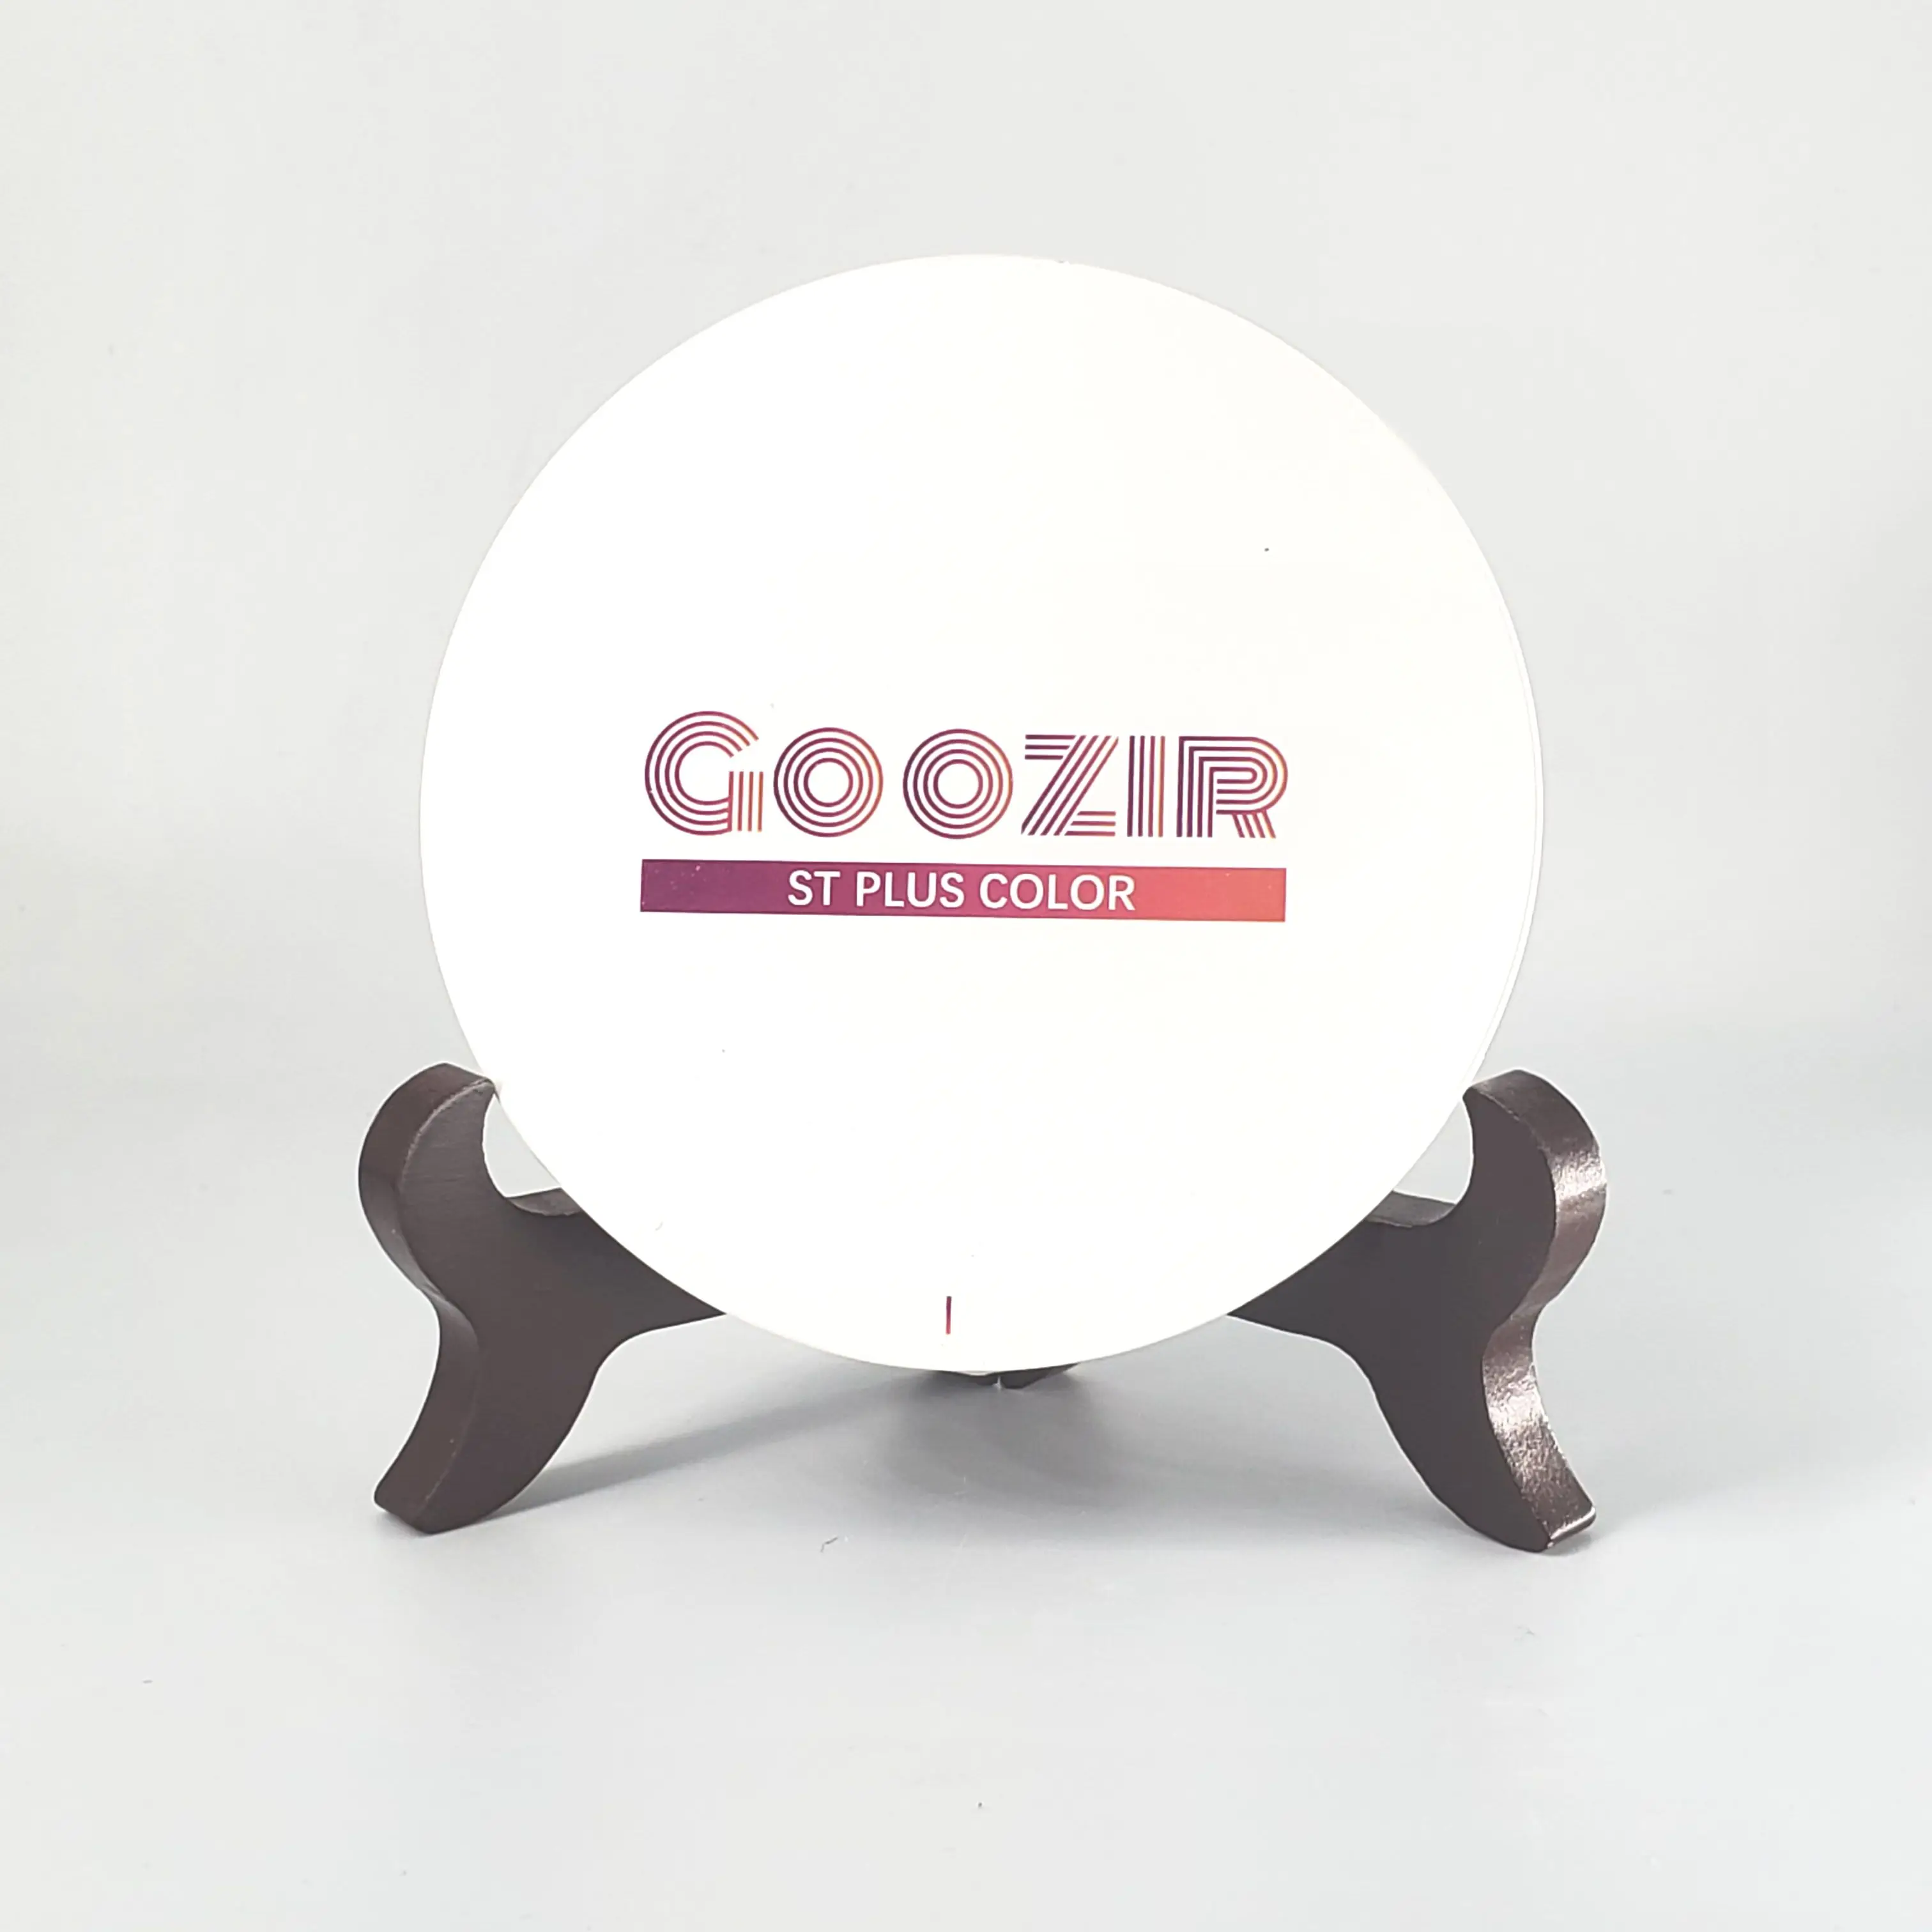 Goozir Dental St Color Zirconia Blank From The Same Zirconia Powder From The Upser Zirconia Block For A Milling Machine